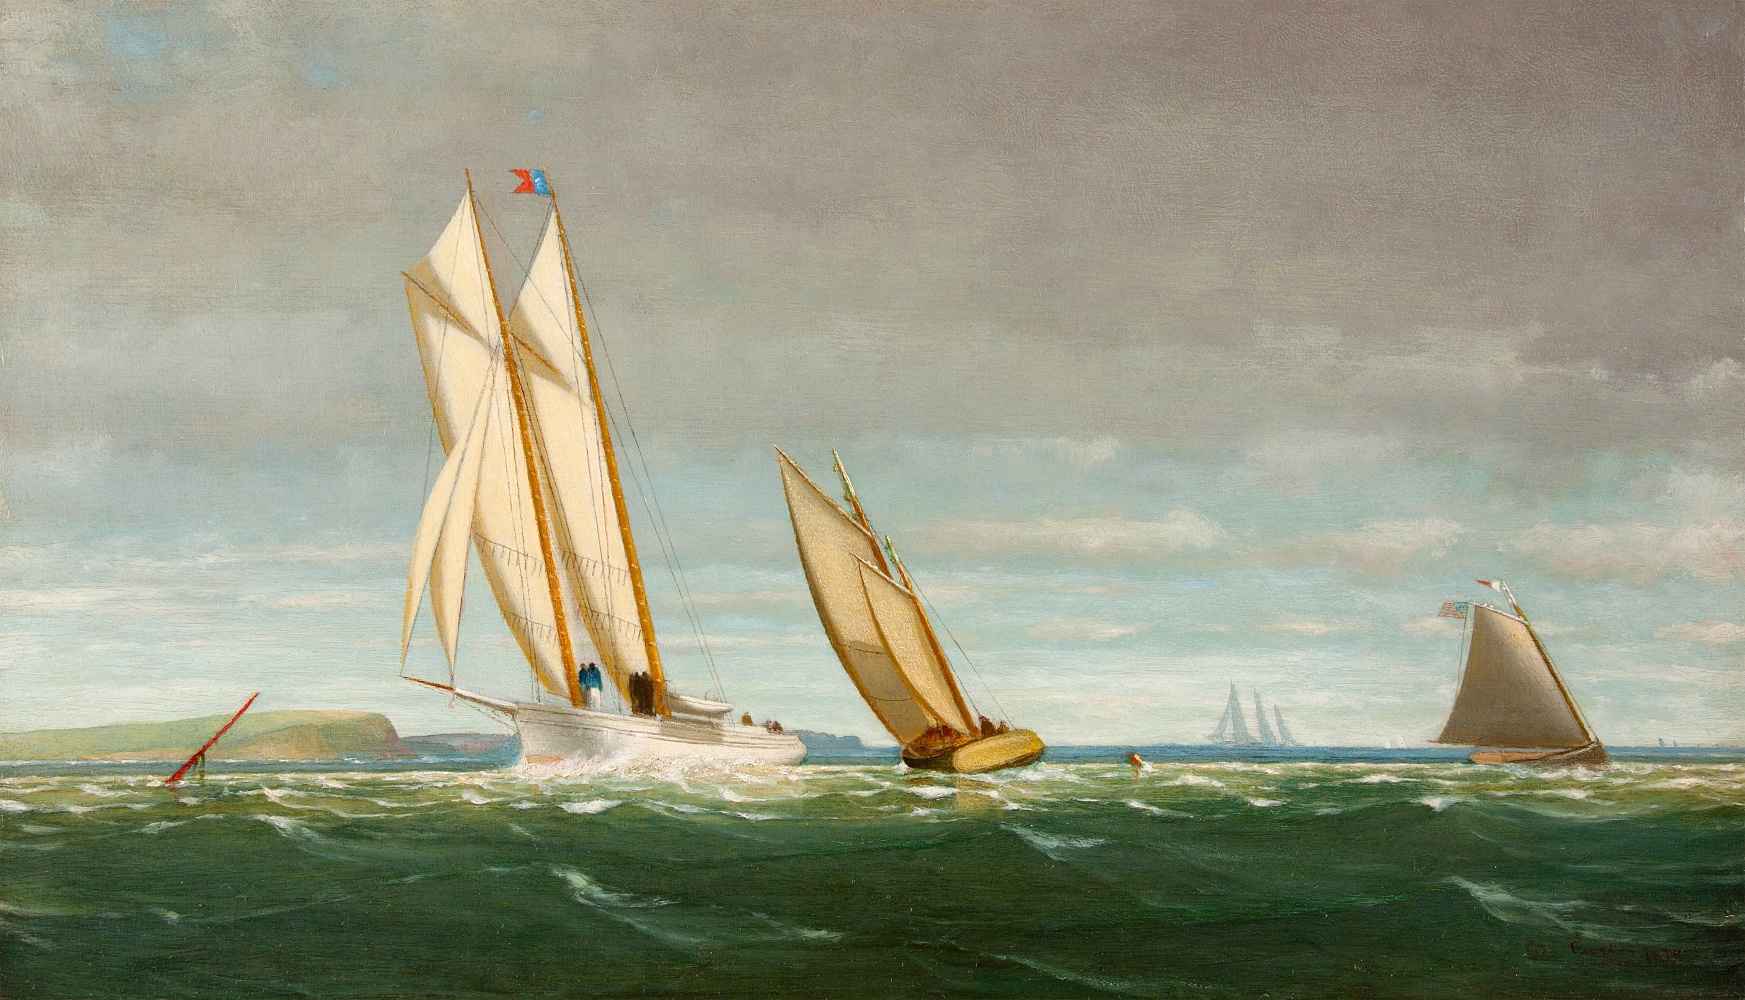 George Curtis (1816–1881), Sailing off the Coast, 1878, oil on panel, 11 ½ x 20 in., signed and dated lower right: Geo. Curtis 1878